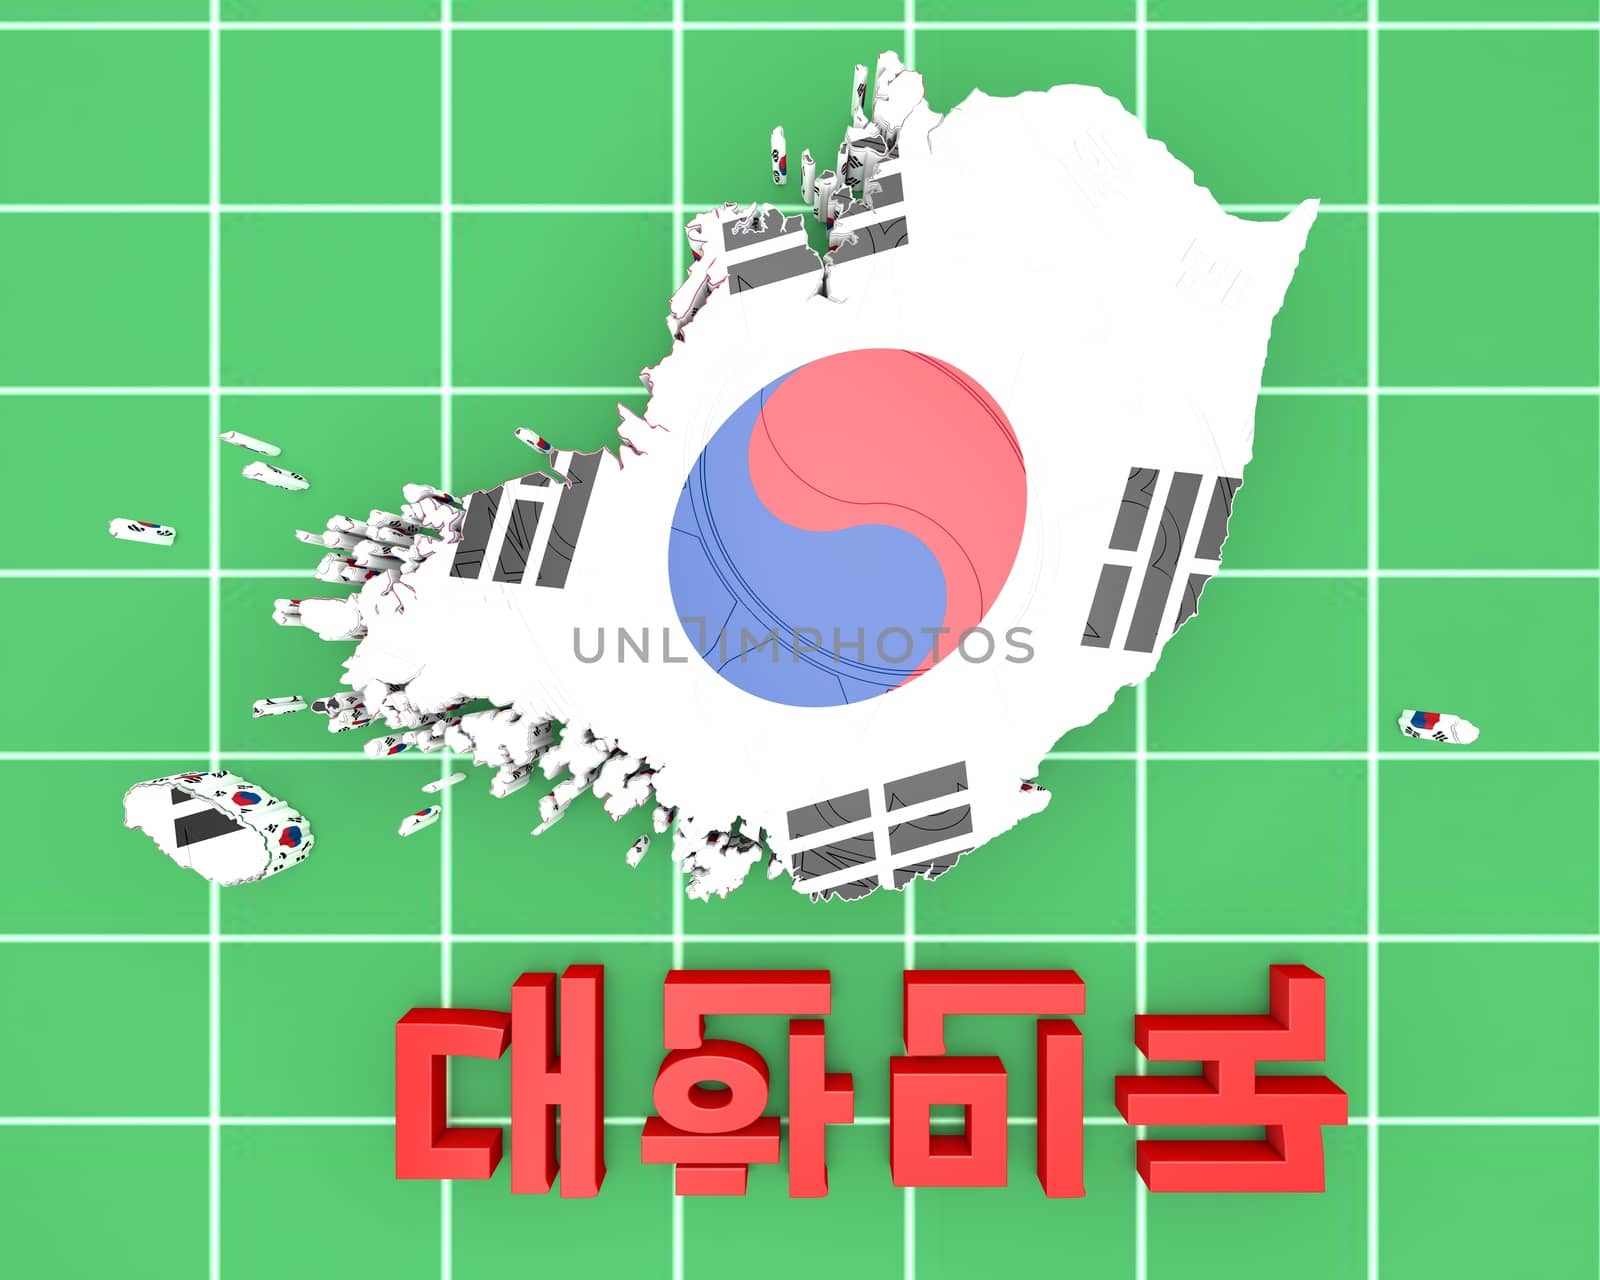 3d map illustration of South Korea with coat of arms